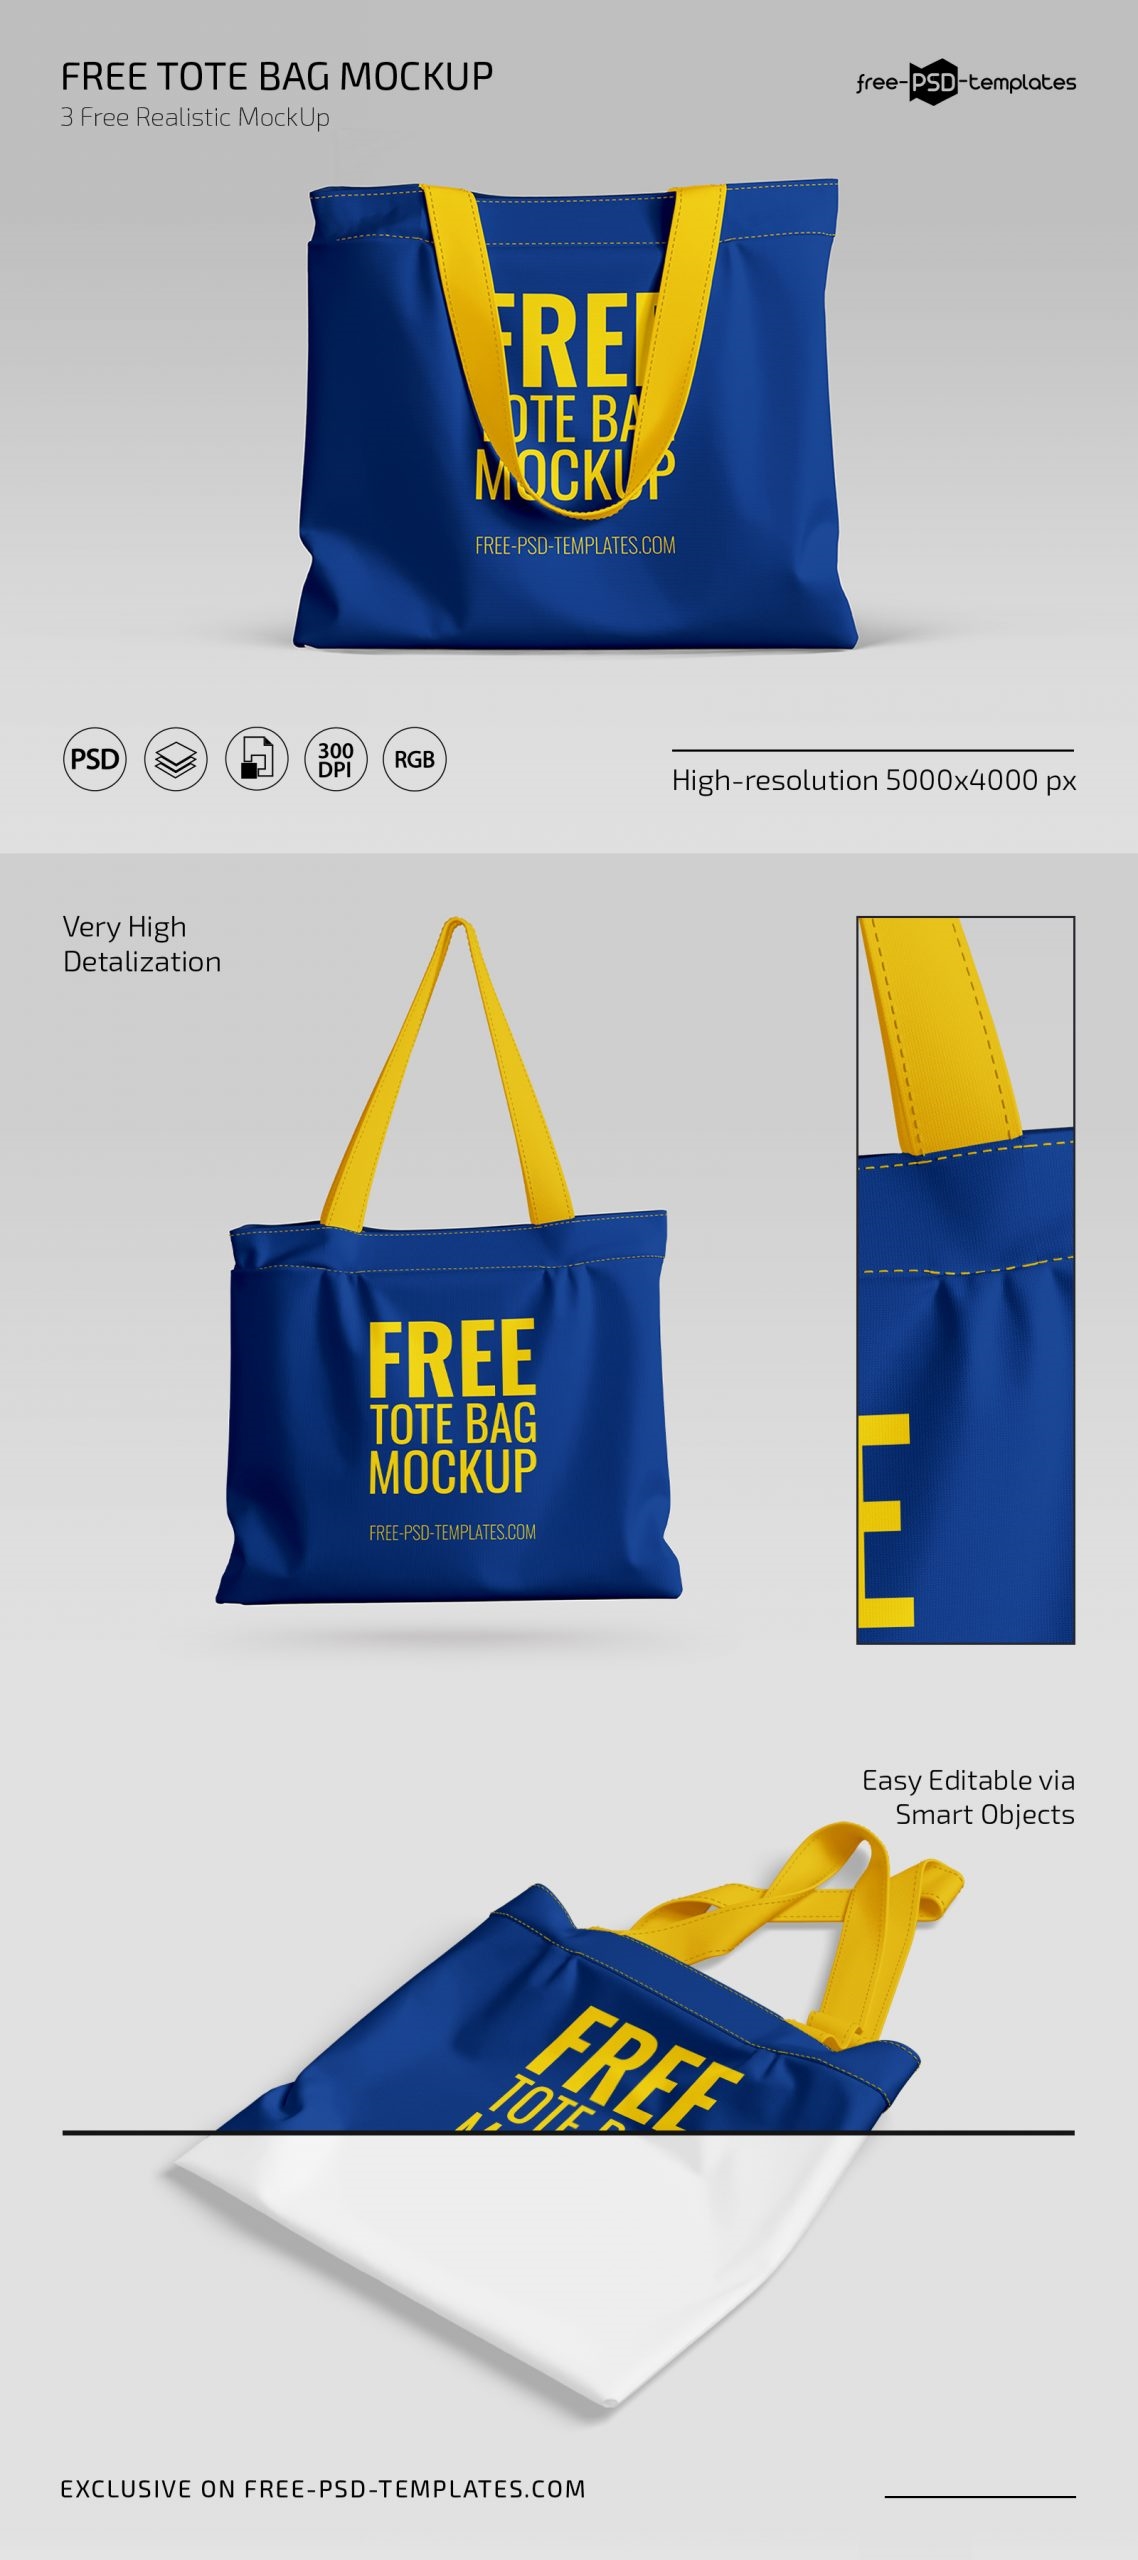 Front and Perspective View of 3 Tote Bag Mockups (FREE) - Resource Boy